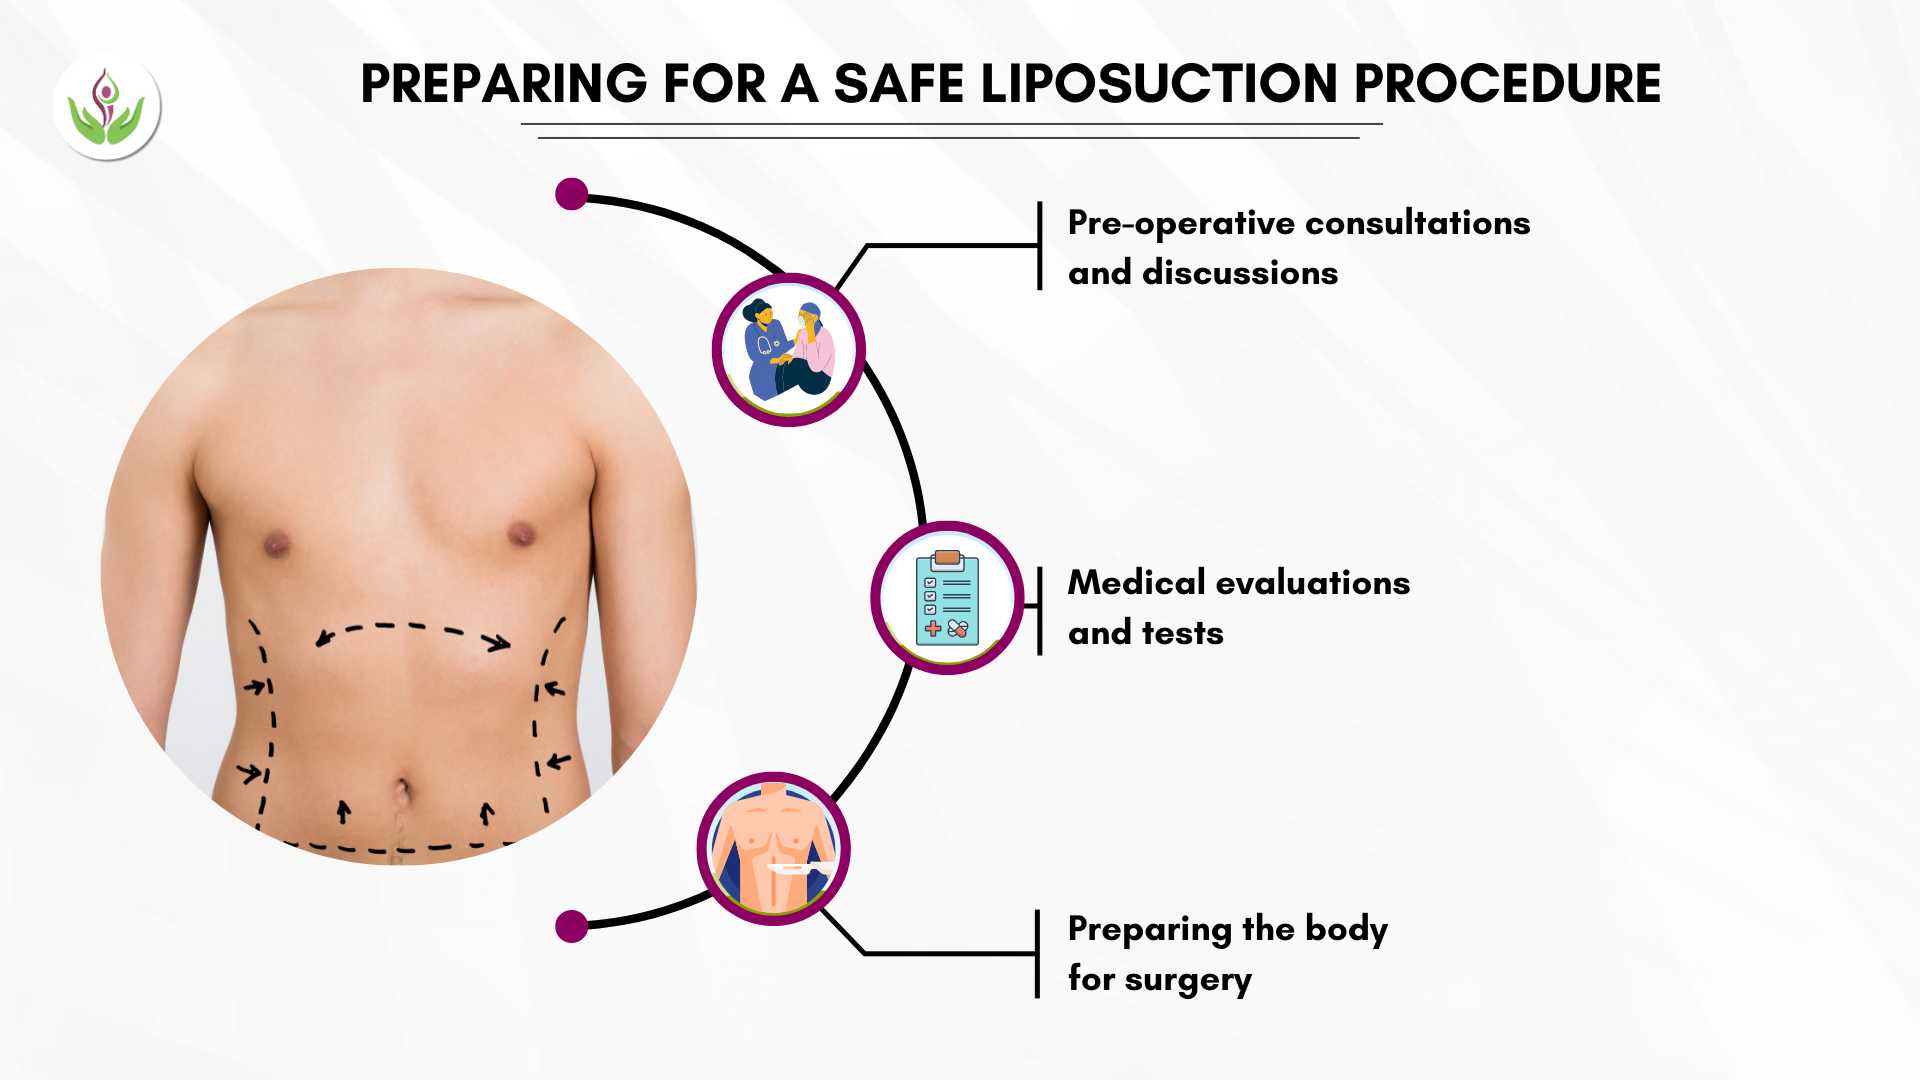 Transformative liposuction for targeted fat removal